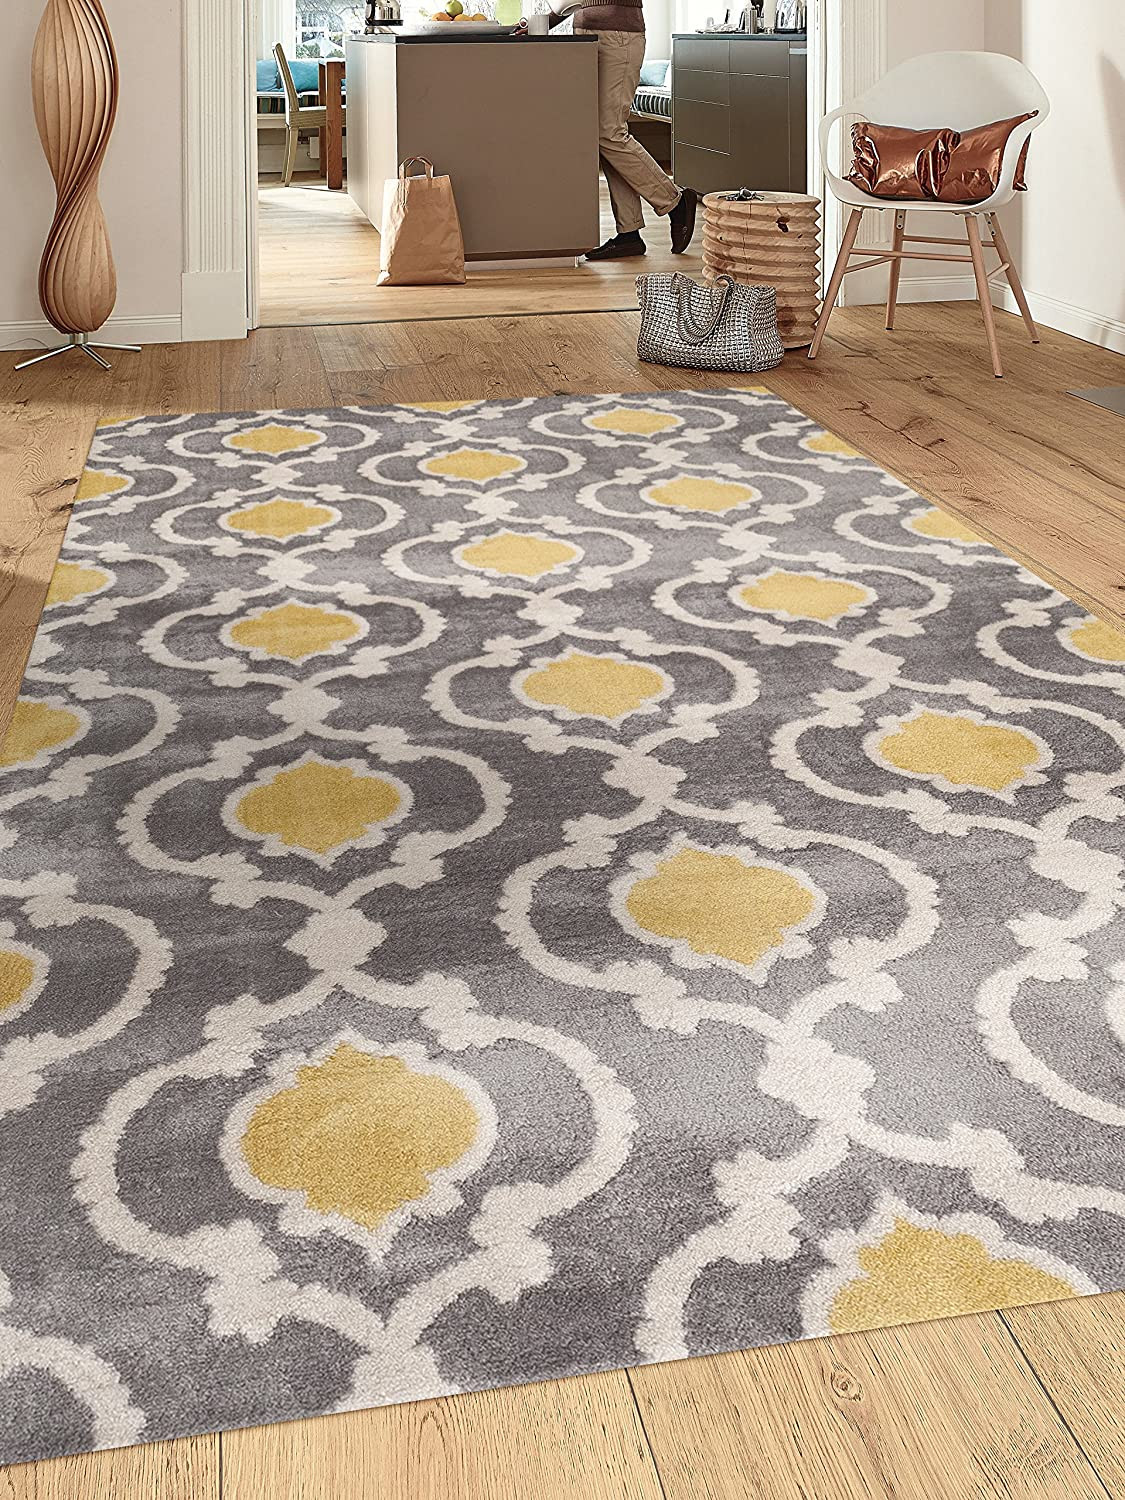 Yellow Rugs For Living Room
 Gray And Yellow Rug Moroccan Trellis Contemporary Modern